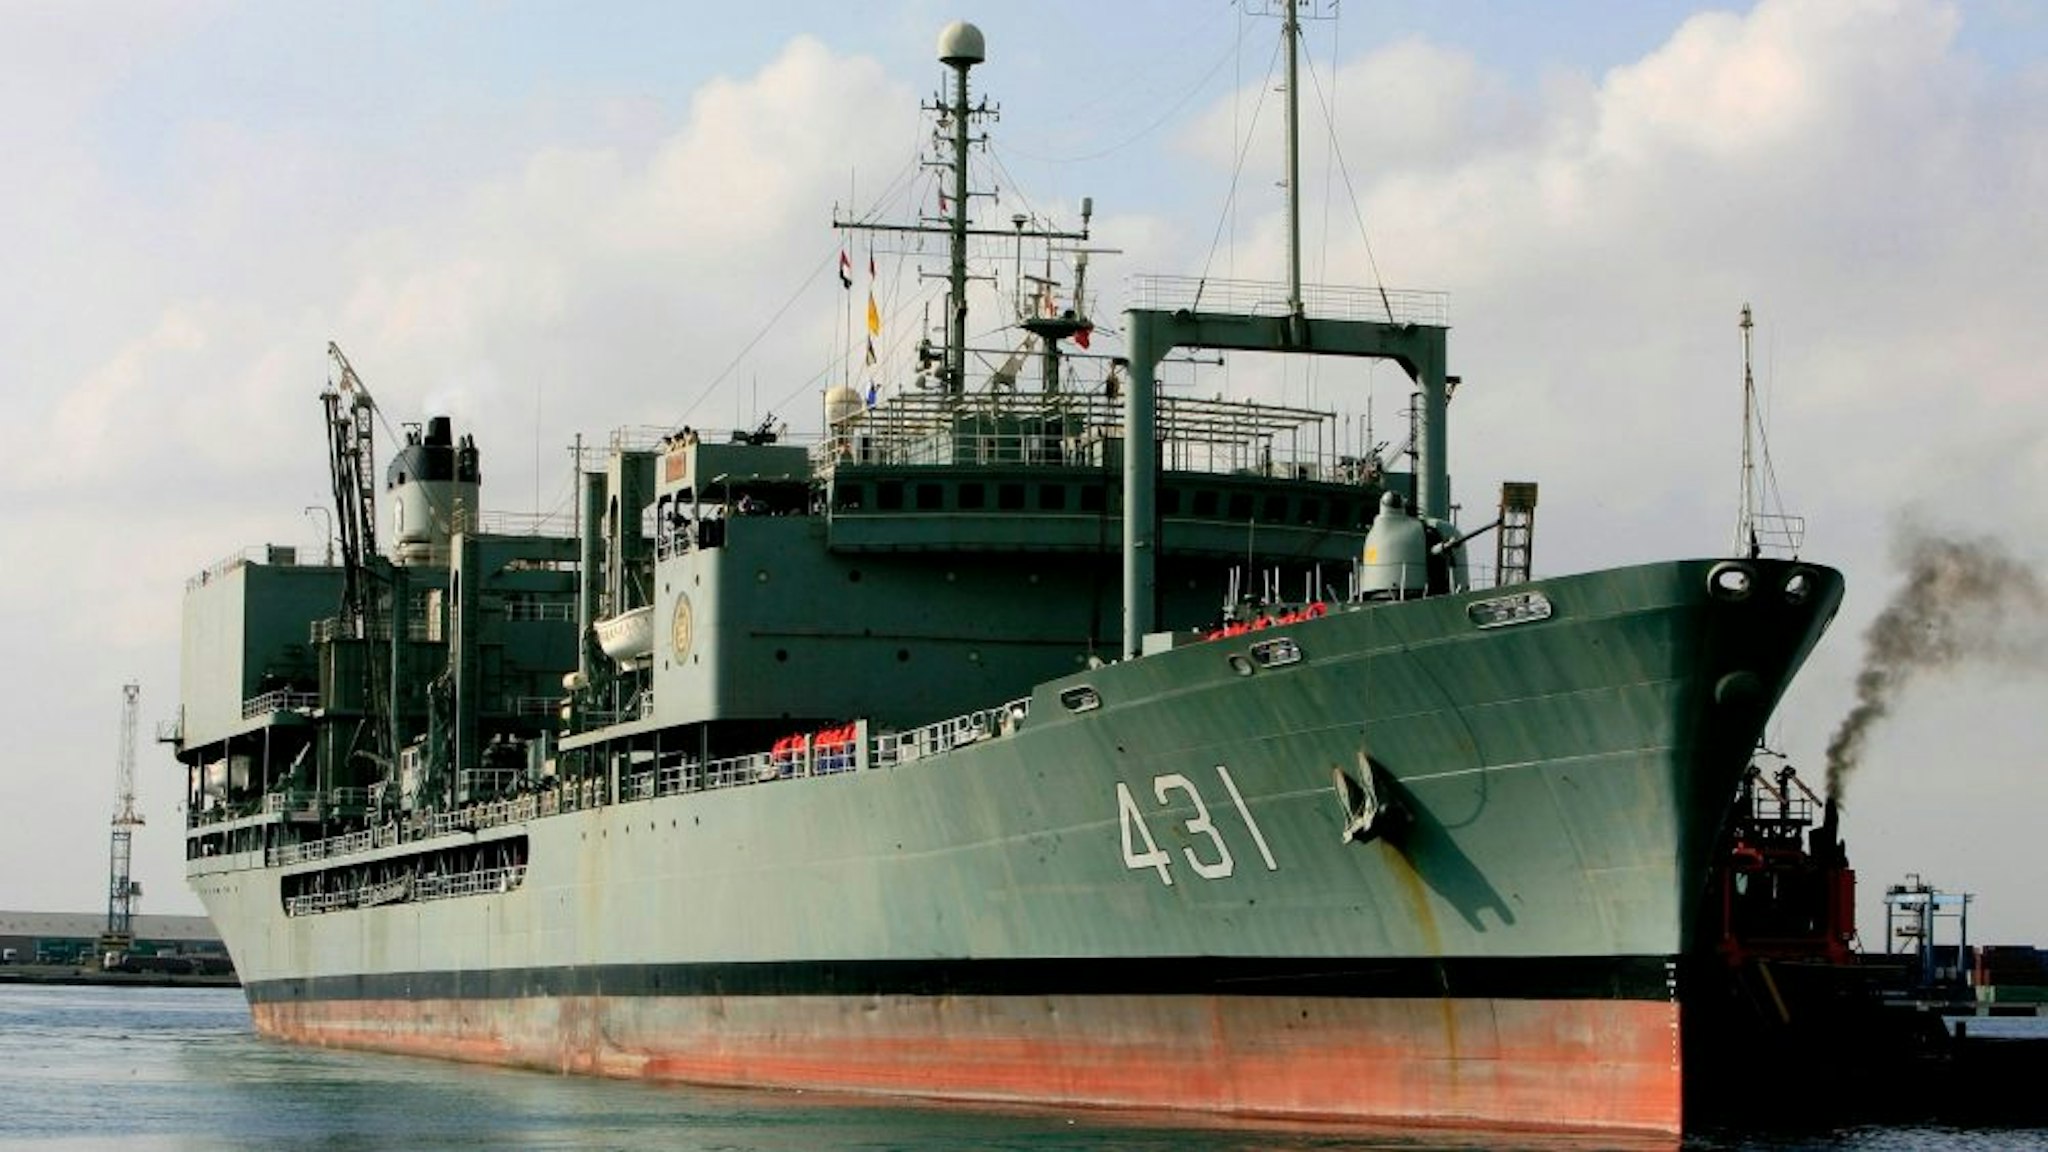 The Iranian Kharg 431 supply navy ship is seen docked in the Red Sea Sudanese town of Port Sudan on October 31, 2012. The visit of two Iranian naval ships to Sudan reflects strong ties between the countries, Sudan's military said after Khartoum denied Iranian involvement in weapons manufacturing.